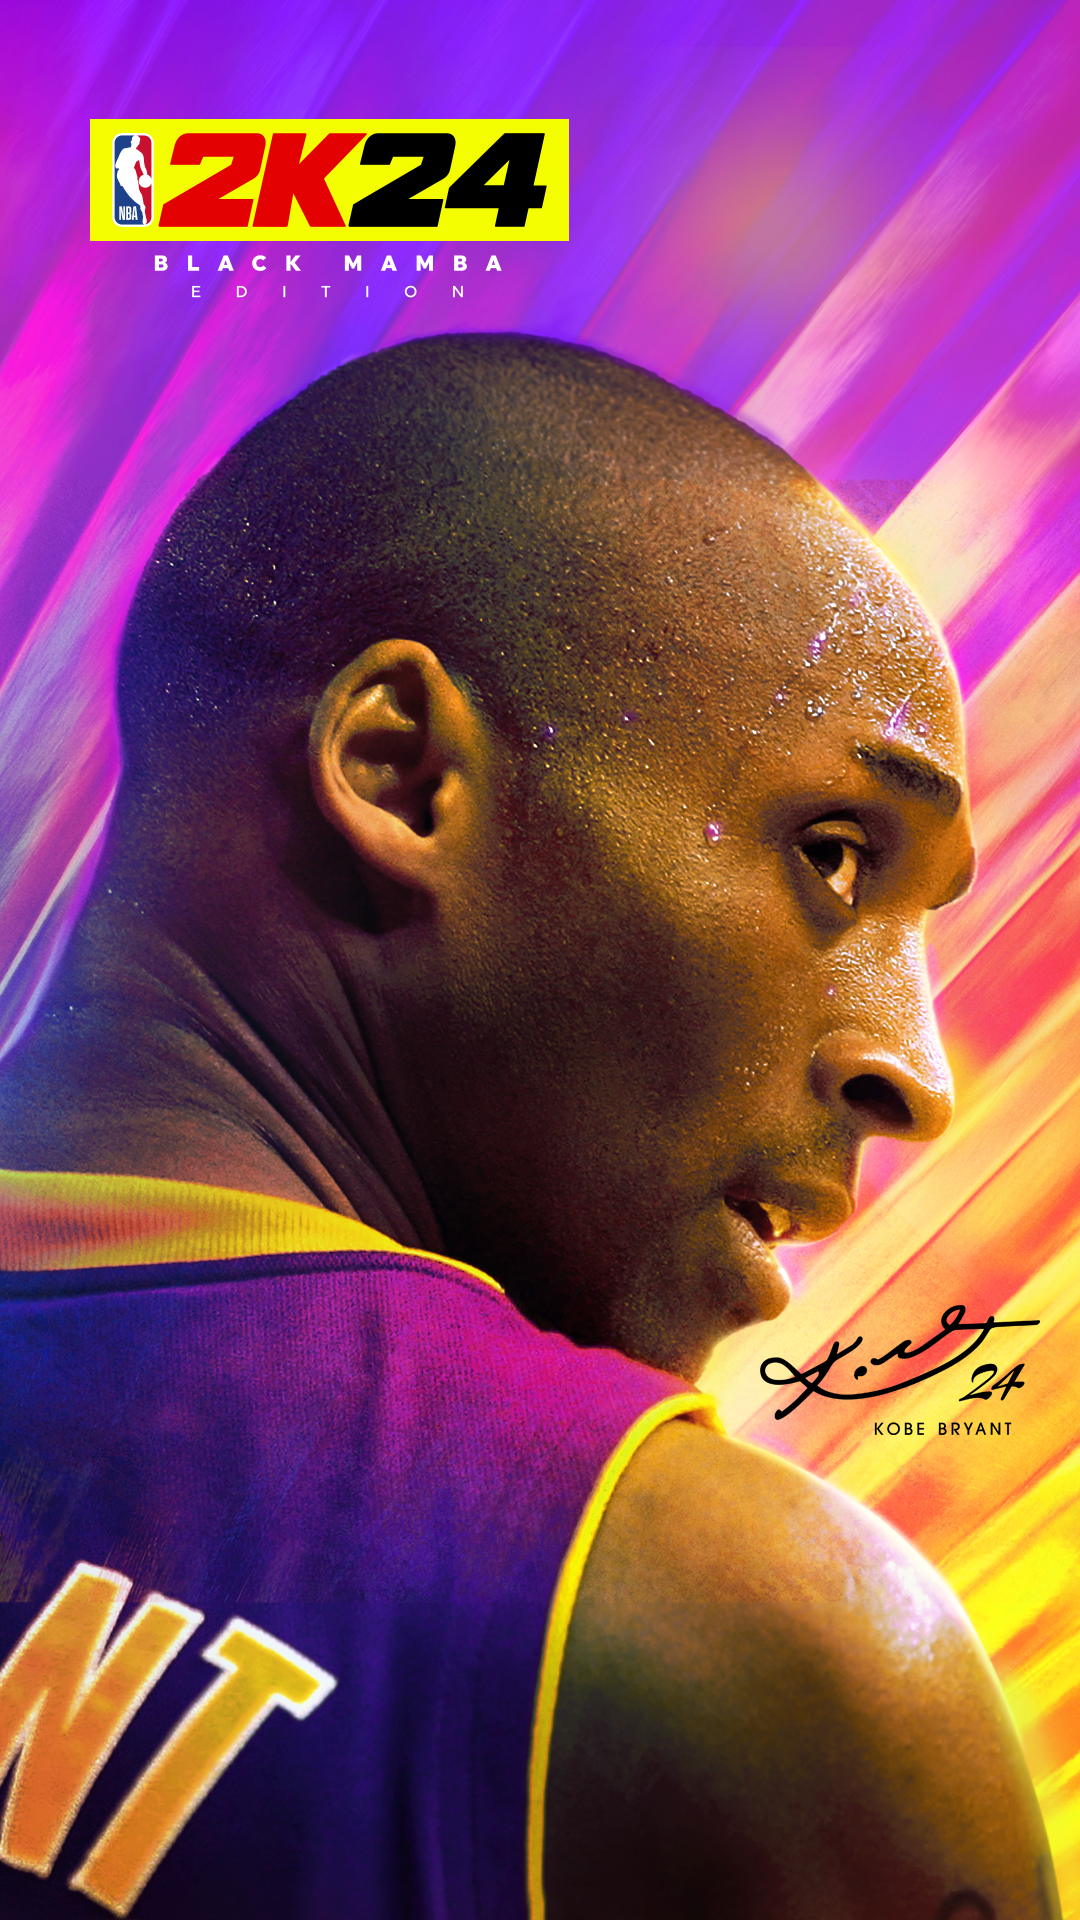 NBA 2K24 mobile wallpaper with iconic basketball player in Lakers jersey against a vibrant colorful background.